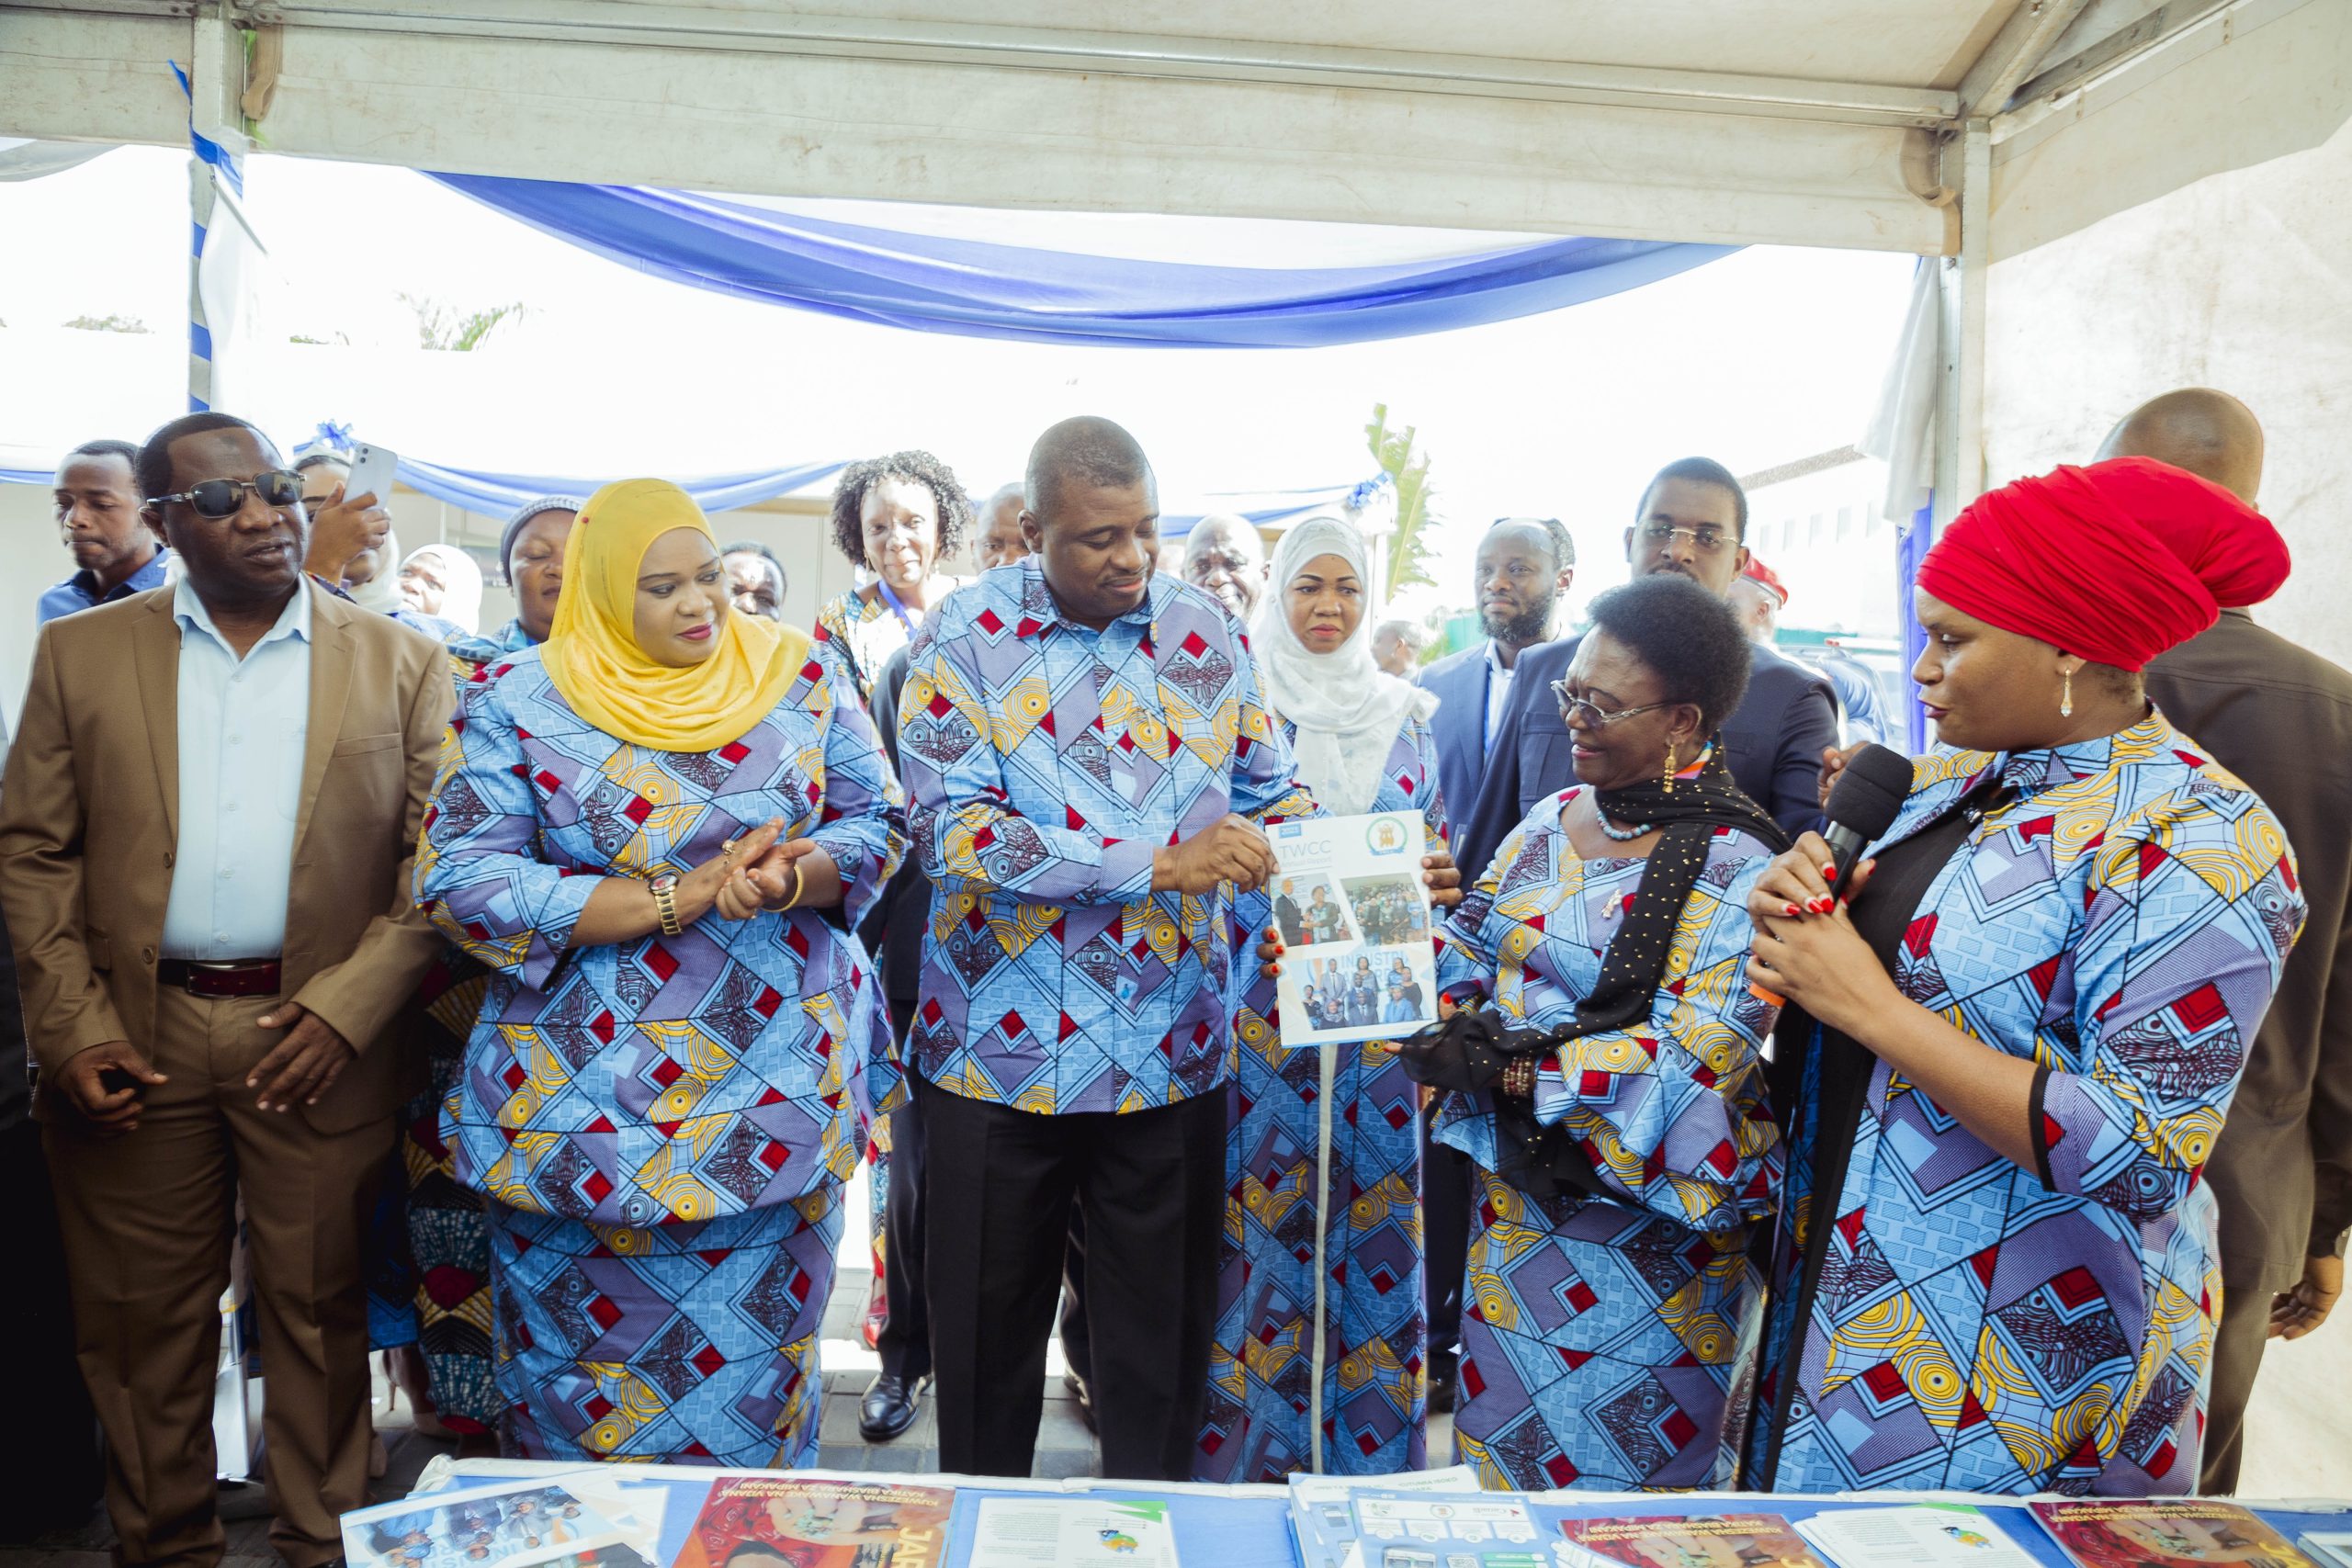 TWCC and TradeMark Africa Partner to Empower Women in Trade at Zanzibar Conference